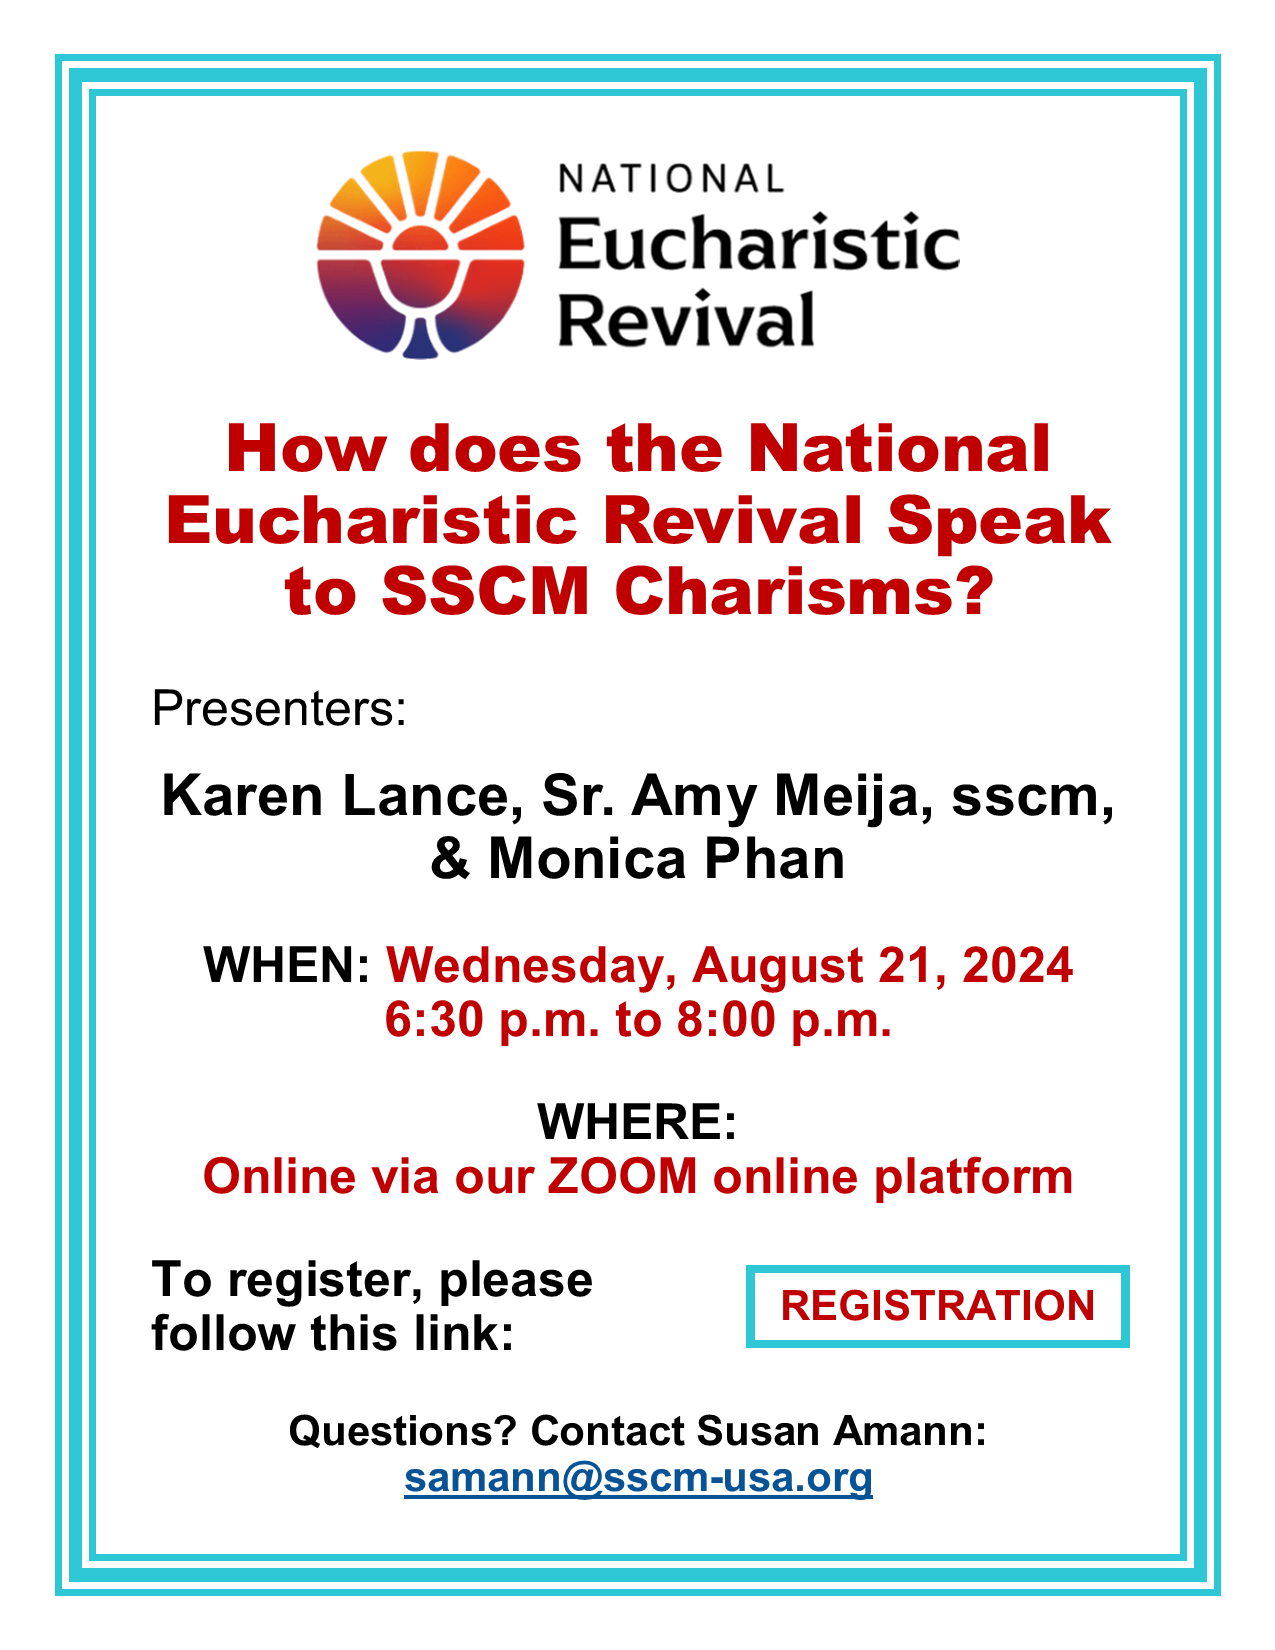 How does the National Eucharistic Revival Speak to SSCM Charisms?: Click here to register